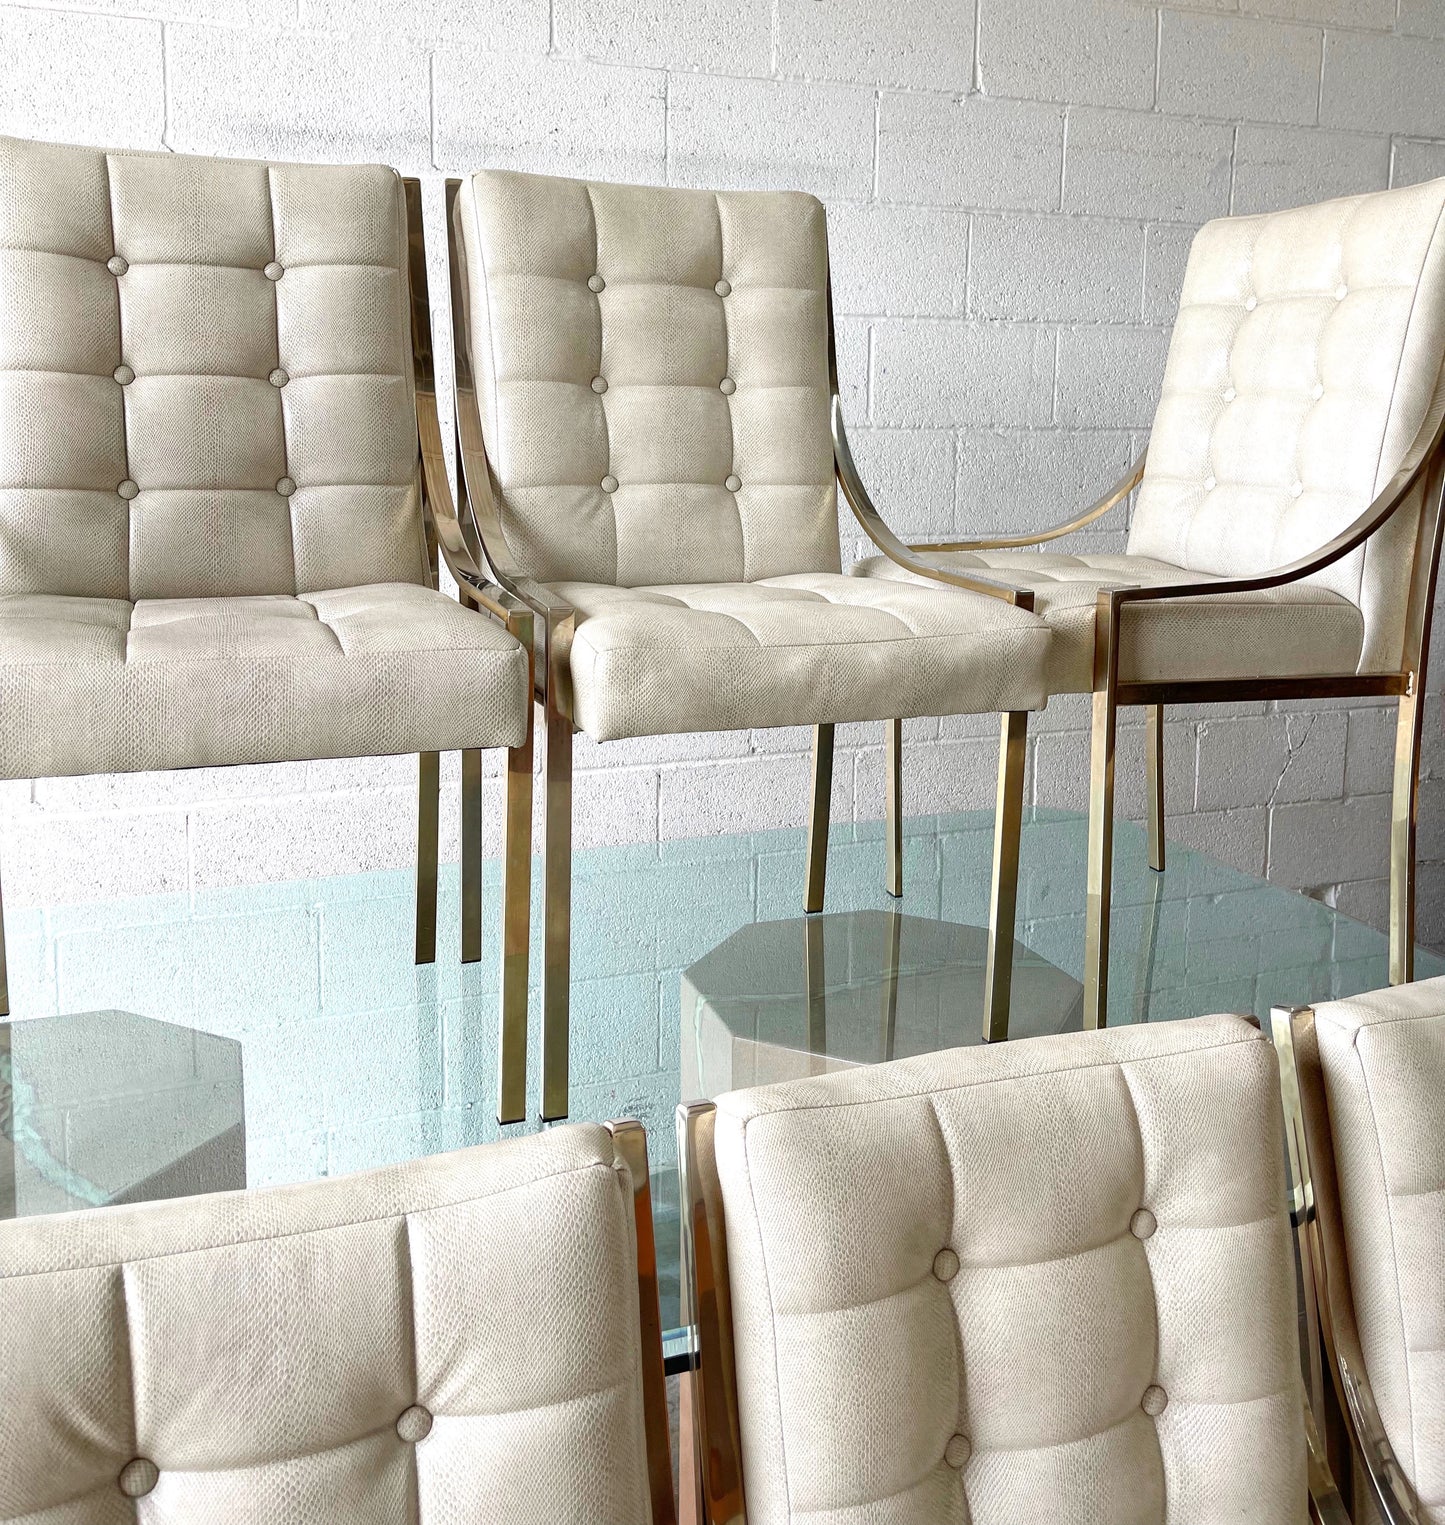 1970’s Chrome Tufted Faux Snakeskin Dining Chairs - Set of 8 Chrome